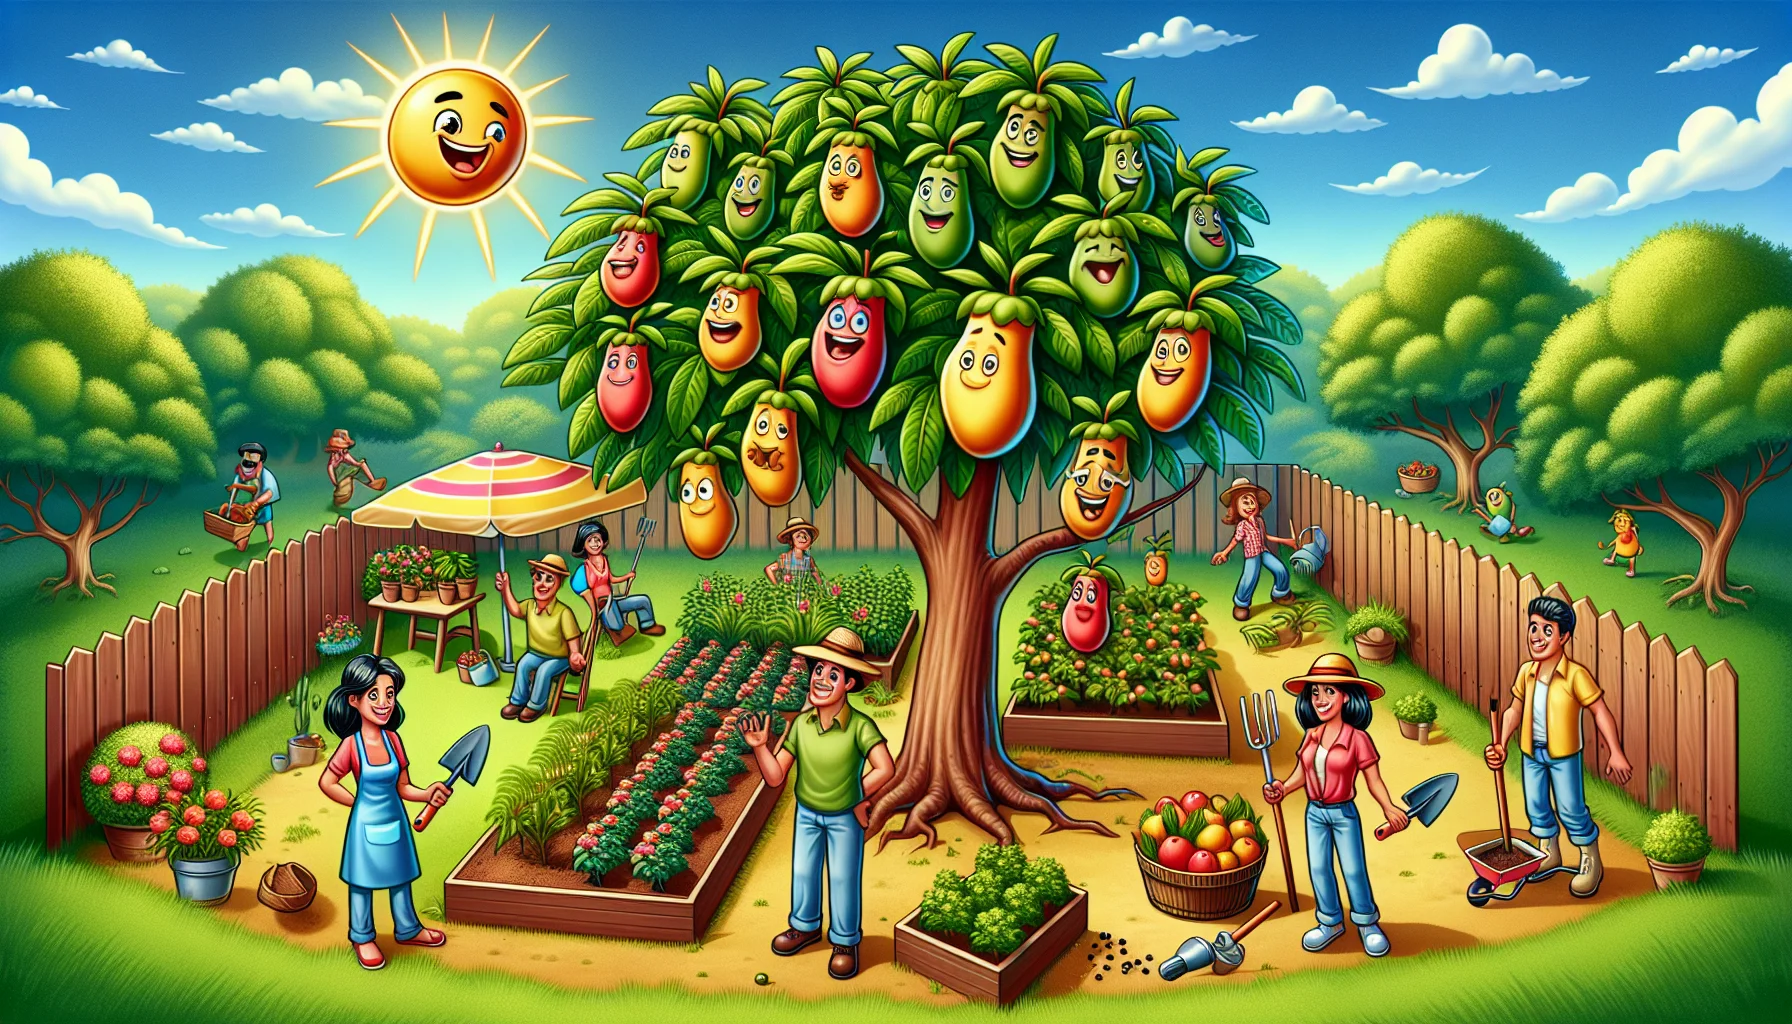 Create a highly detailed and realistic image of a sunny backyard garden. In the garden, there is a humorous scenario taking place. There's a vibrant pawpaw tree with ripe pawpaw fruits hanging from its branches. Some of these fruits have amusing faces drawn on them, like they are animated characters. There are also a few people scattered around, diverse in ethnicity and gender, all with cheerful expressions and gardening tools in their hands. A cartoon-style thought bubble from one of the pawpaw fruits suggests 'Gardening is Fun!'. This image should radiate a light-hearted and playful mood to encourage a passion for gardening.